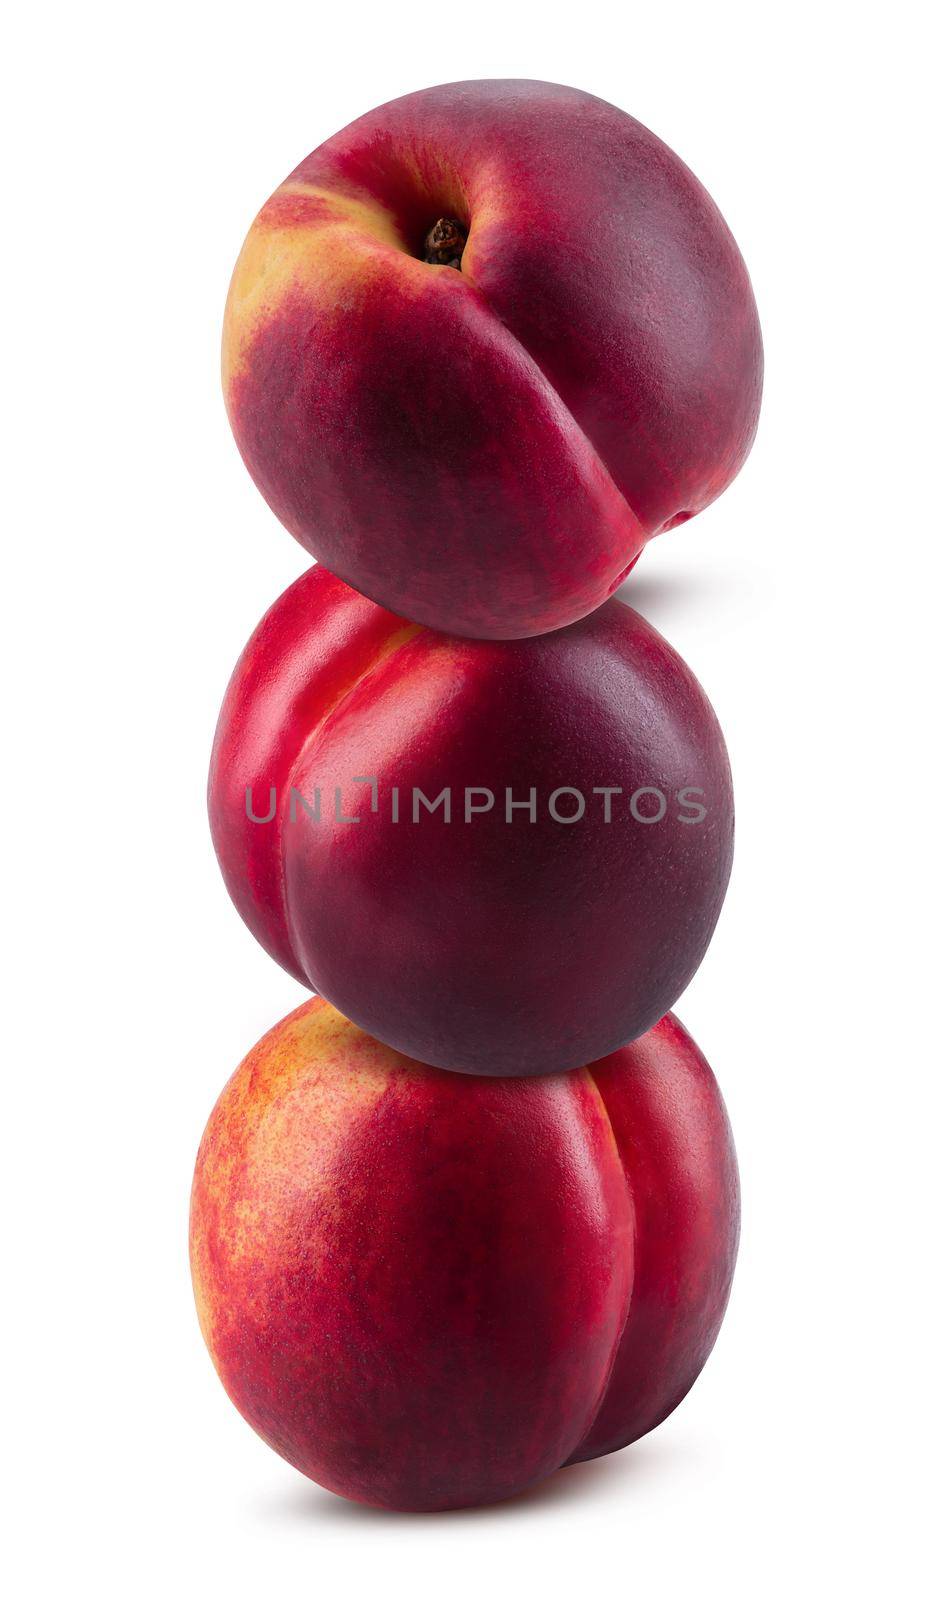 Three smooth-skinned, sweet nectarines isolated on white background with copy space for text or images. Variety of peach. Side view. Close-up shot.